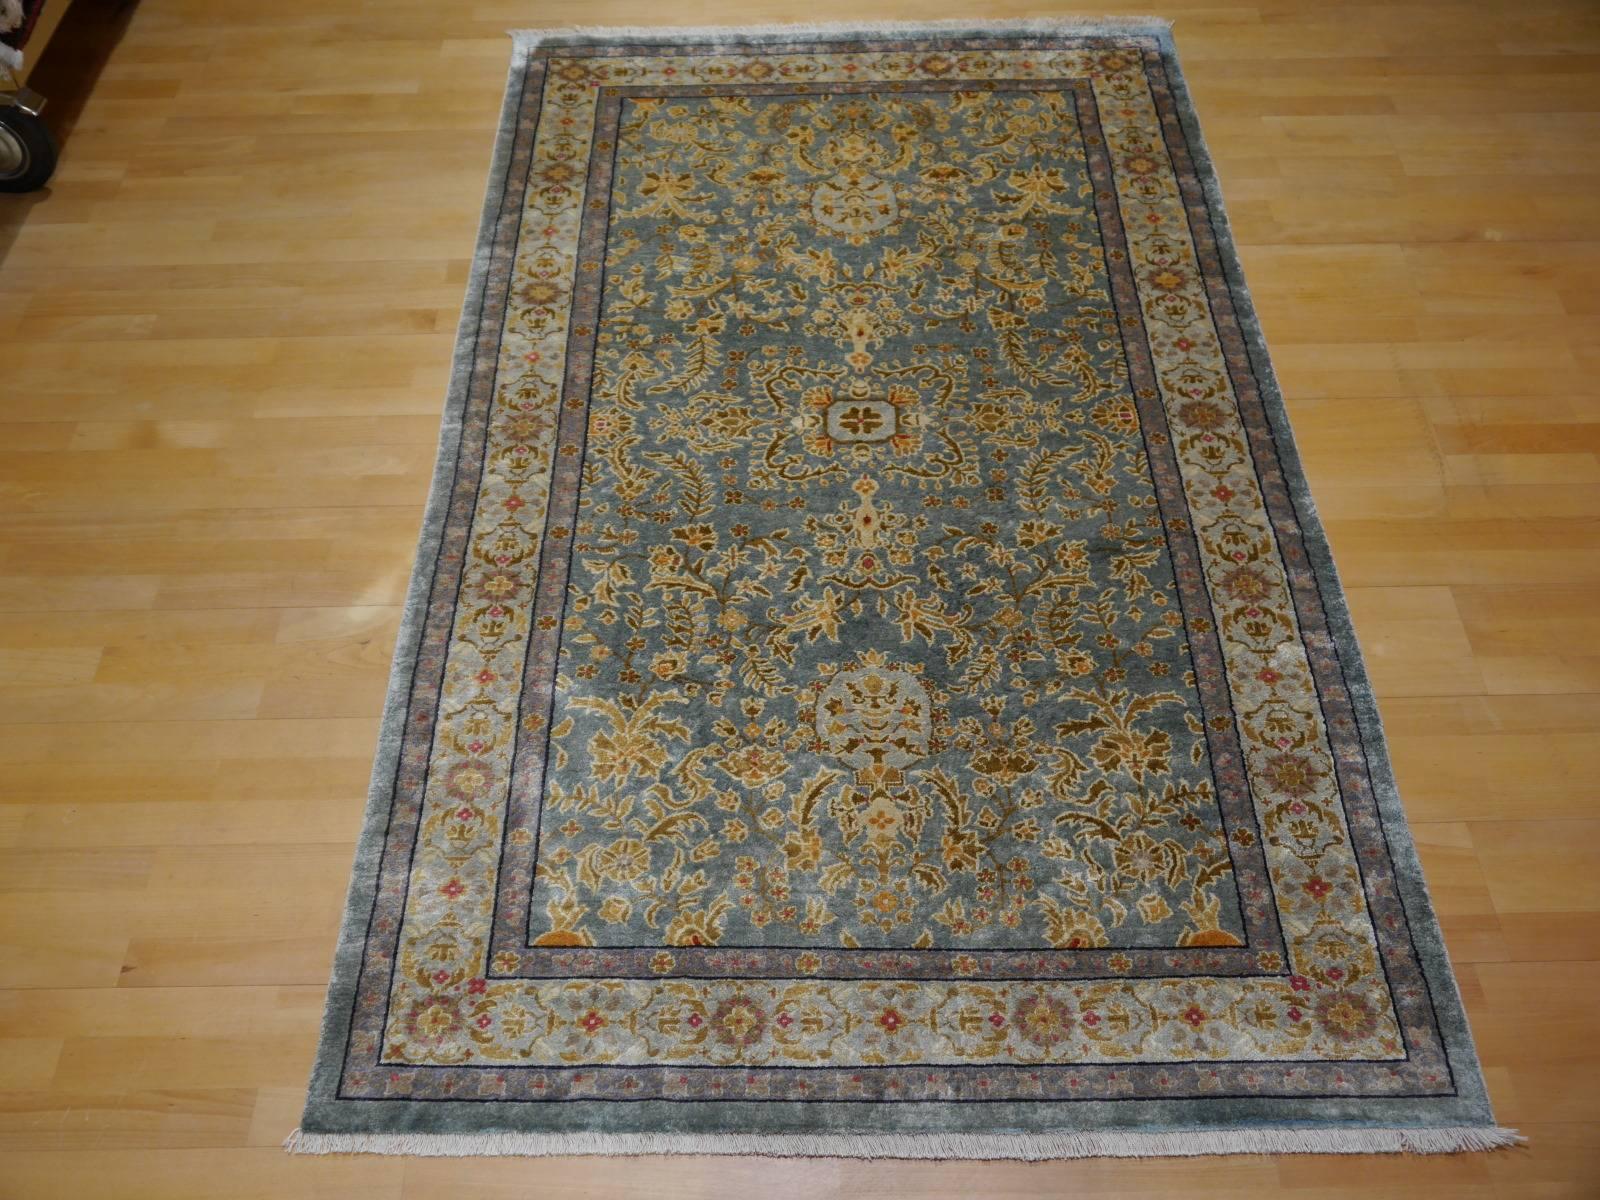 This is a very lovely oriental rug made in eastern region of Turkestan / Chinese border area. it is a so called Khotan carpet. These rugs have a fine hand-knotted structure, usually made of wool on a cotton foundation. This rare example is all pure